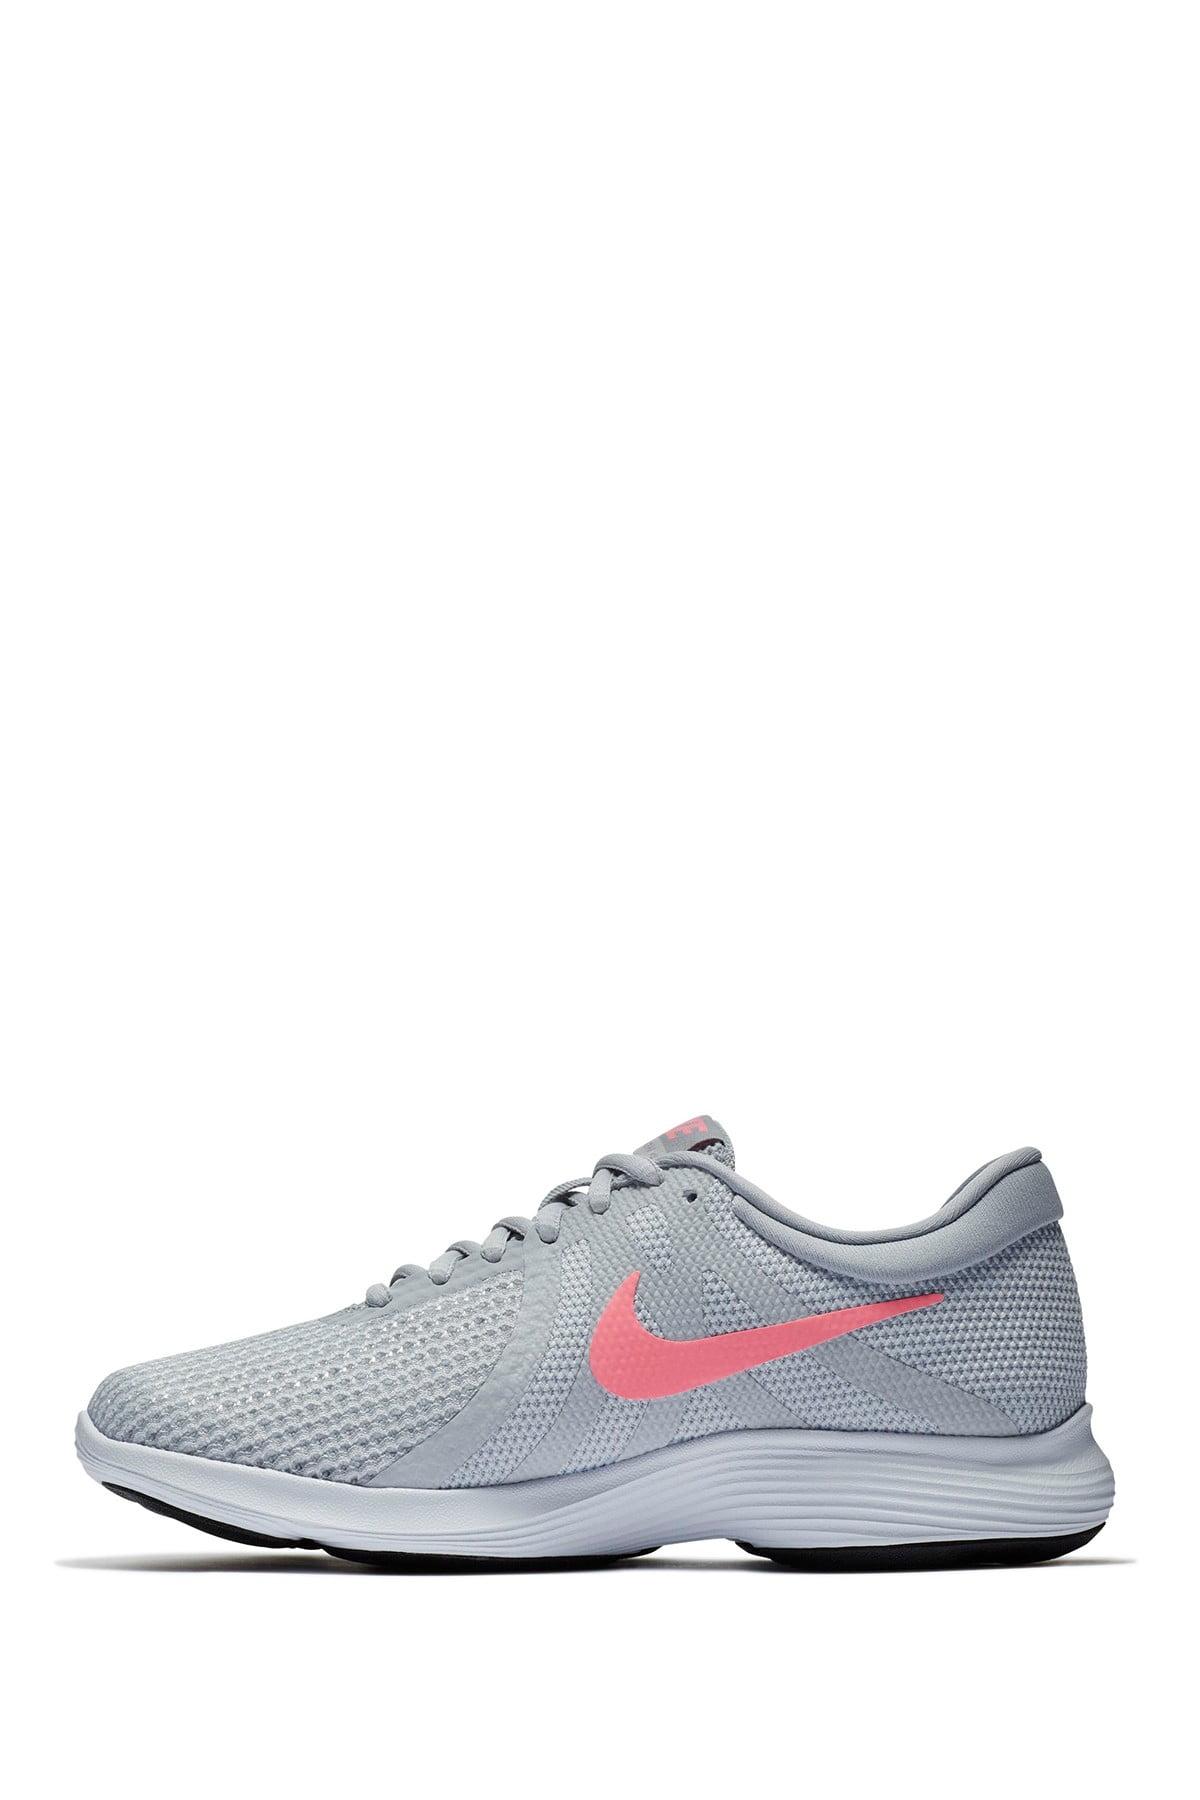 Nike Synthetic Women's Revolution 4 Running Sneakers From Finish Line - Lyst